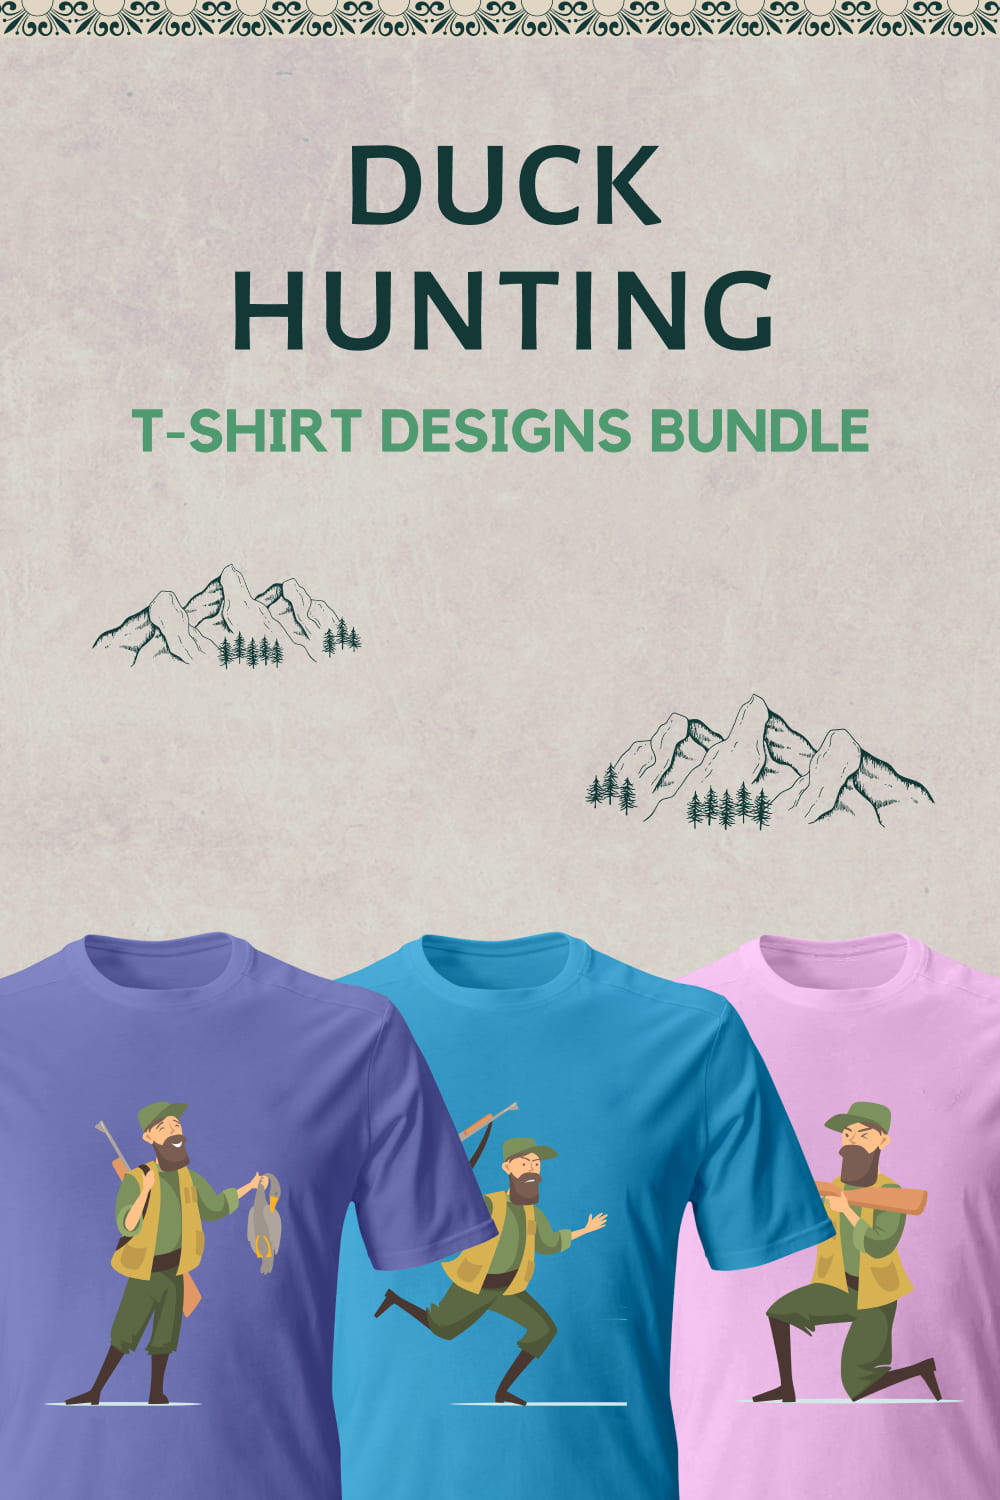 A bunch of images of T-shirts with exquisite prints of the duck hunter.